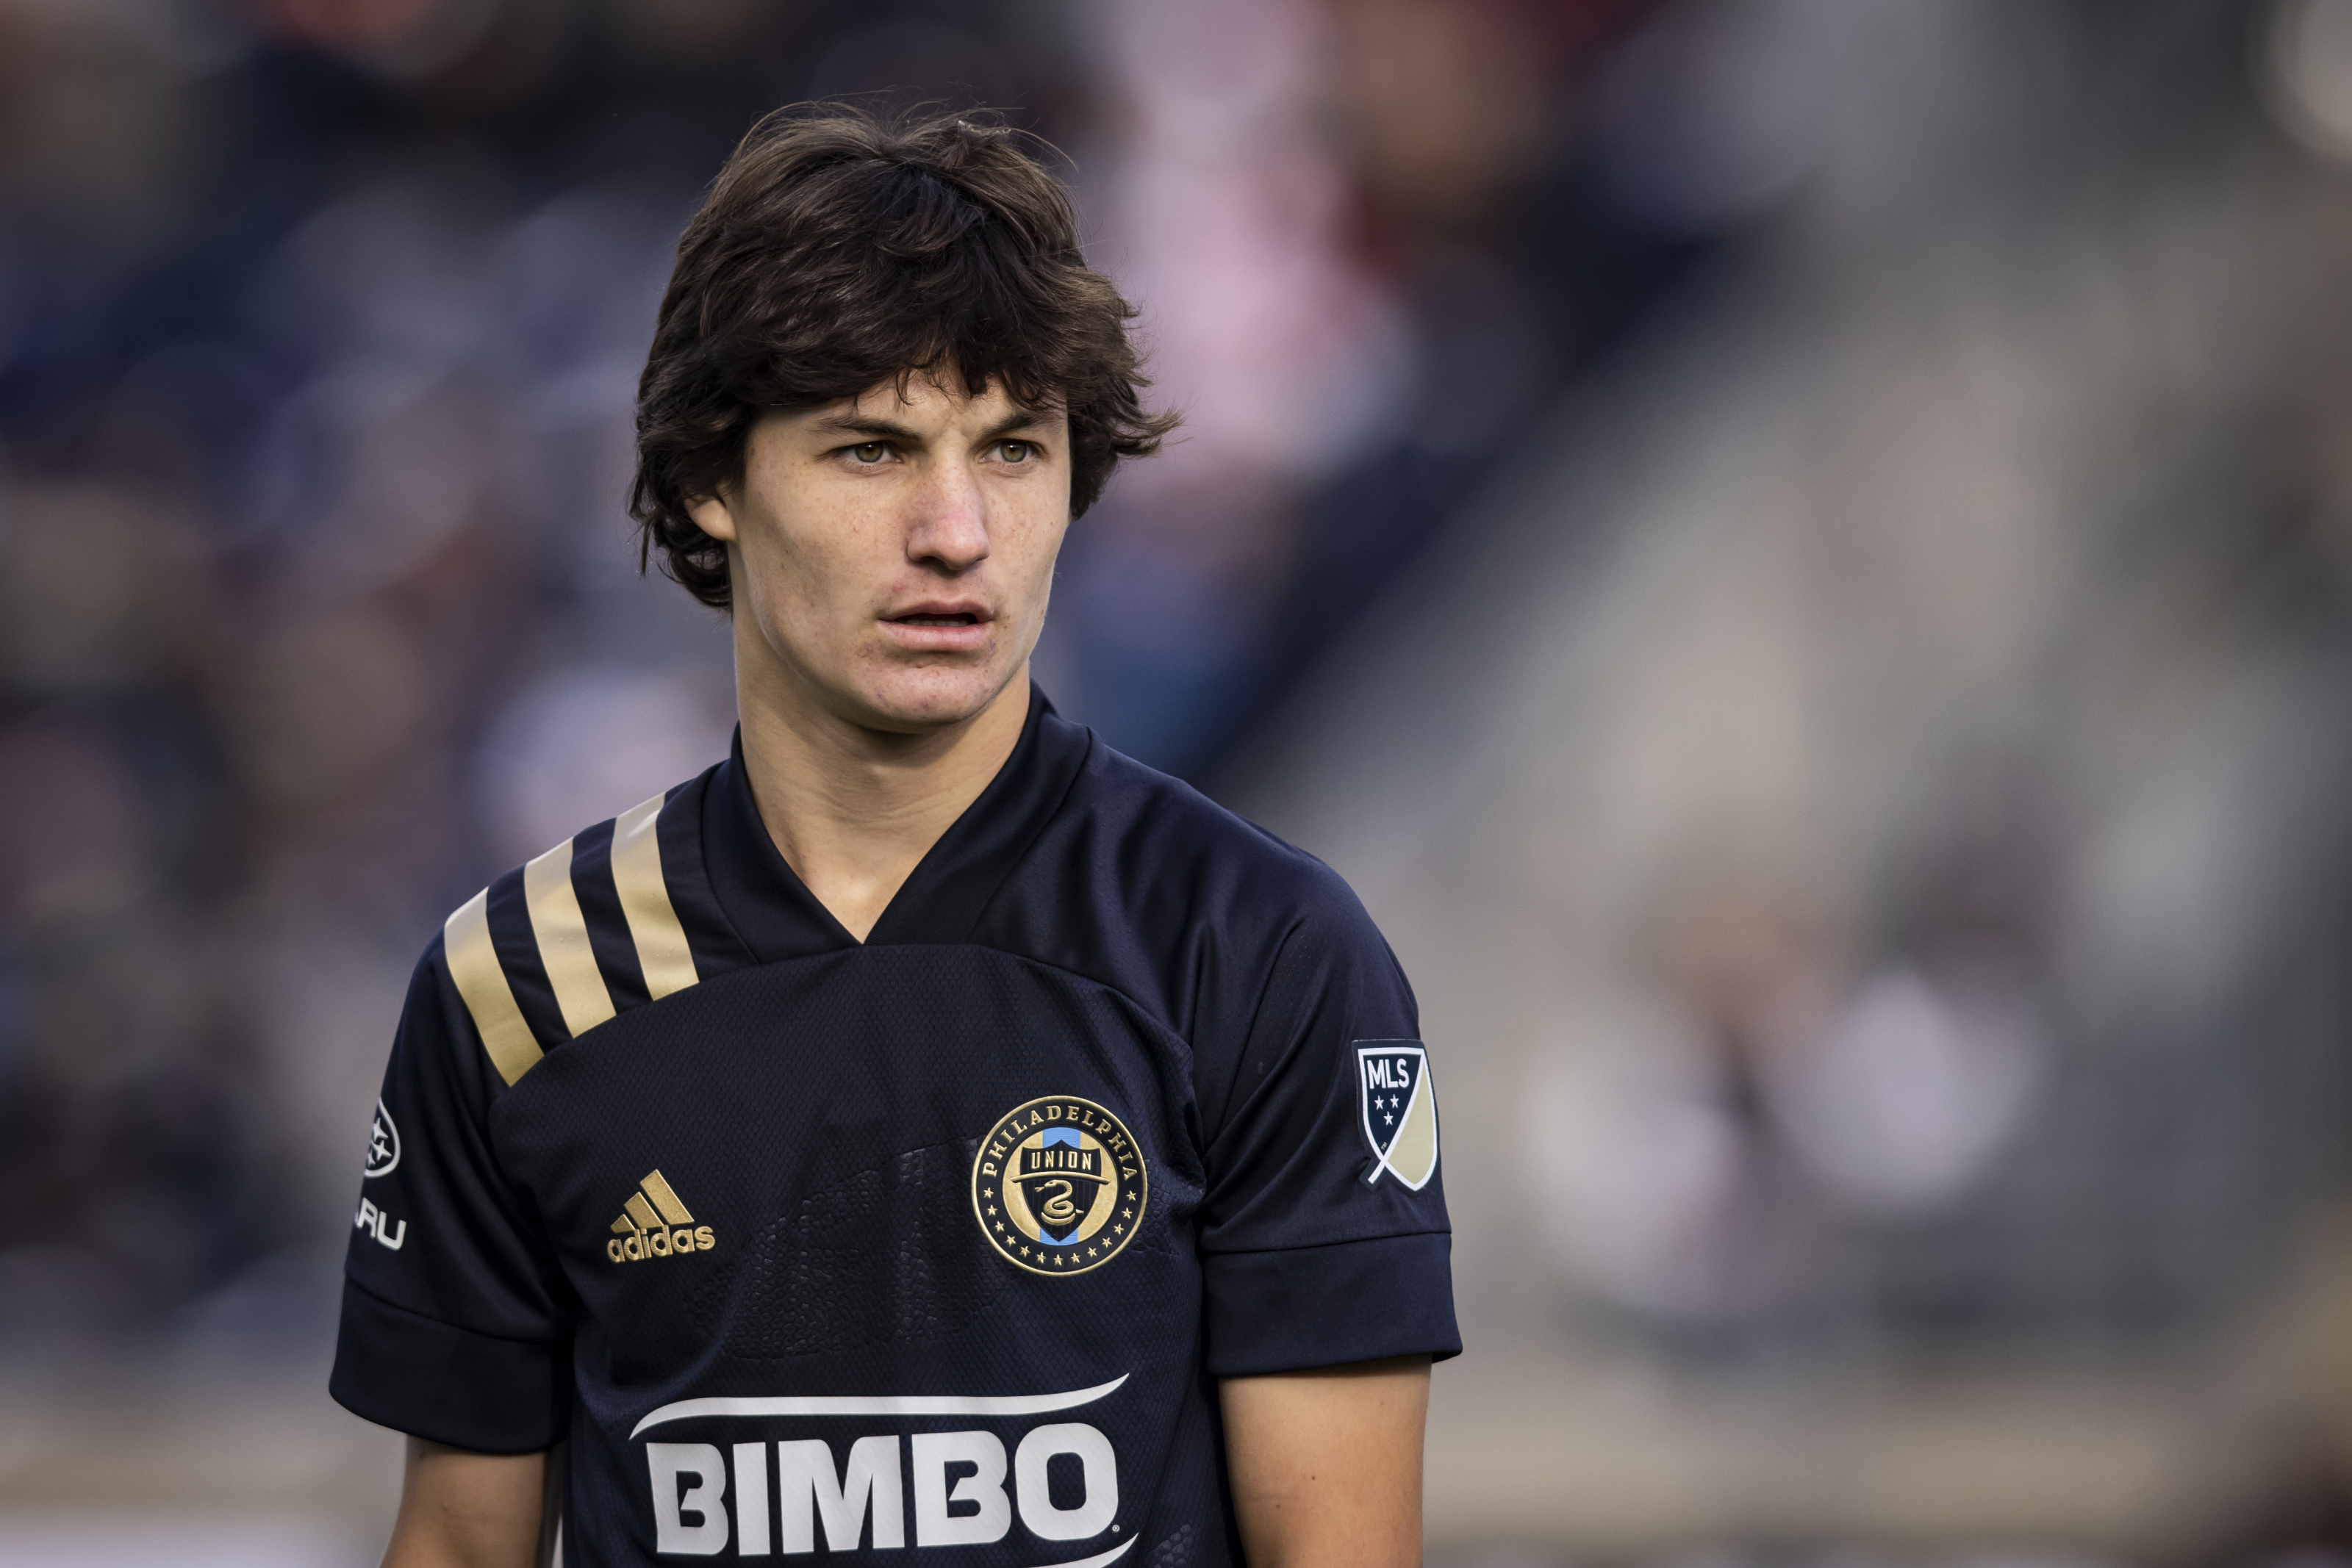 Philadelphia Union, Eintracht Frankfurt have agreement in place for Paxten  Aaronson transfer: Sources - The Athletic